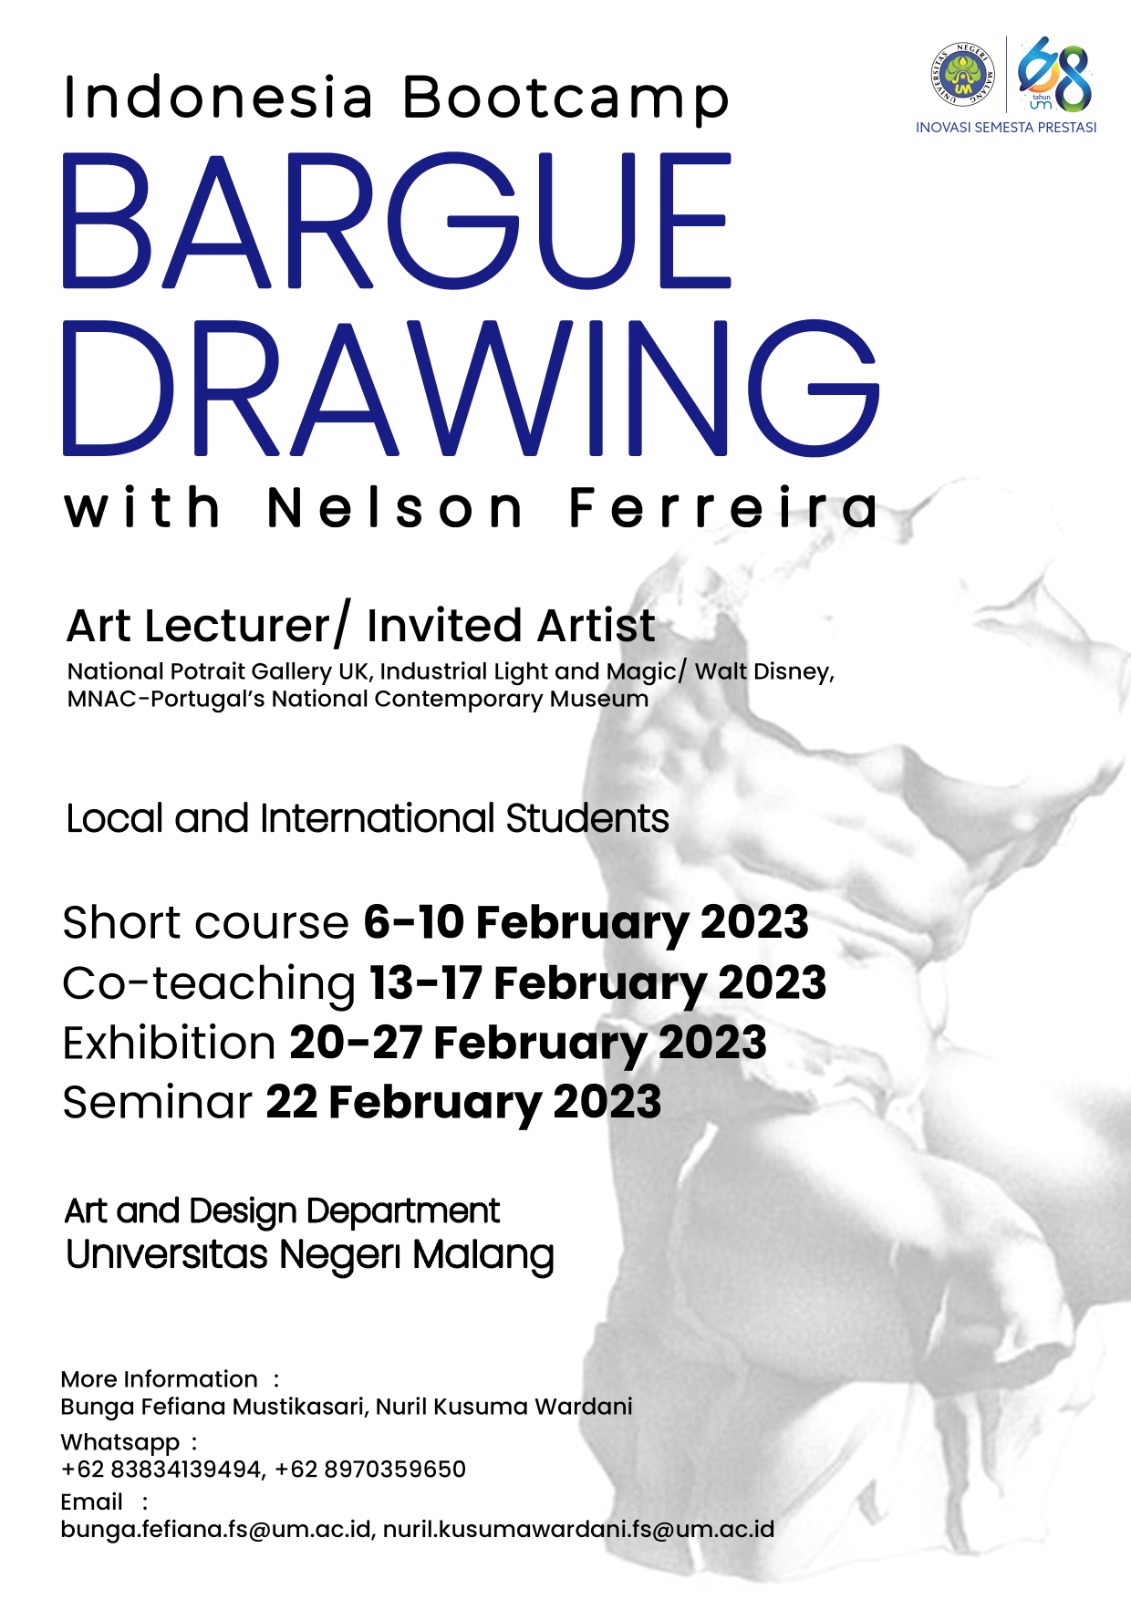 Indonesia Bootcamp Bargue Drawing With Nelson Ferreira